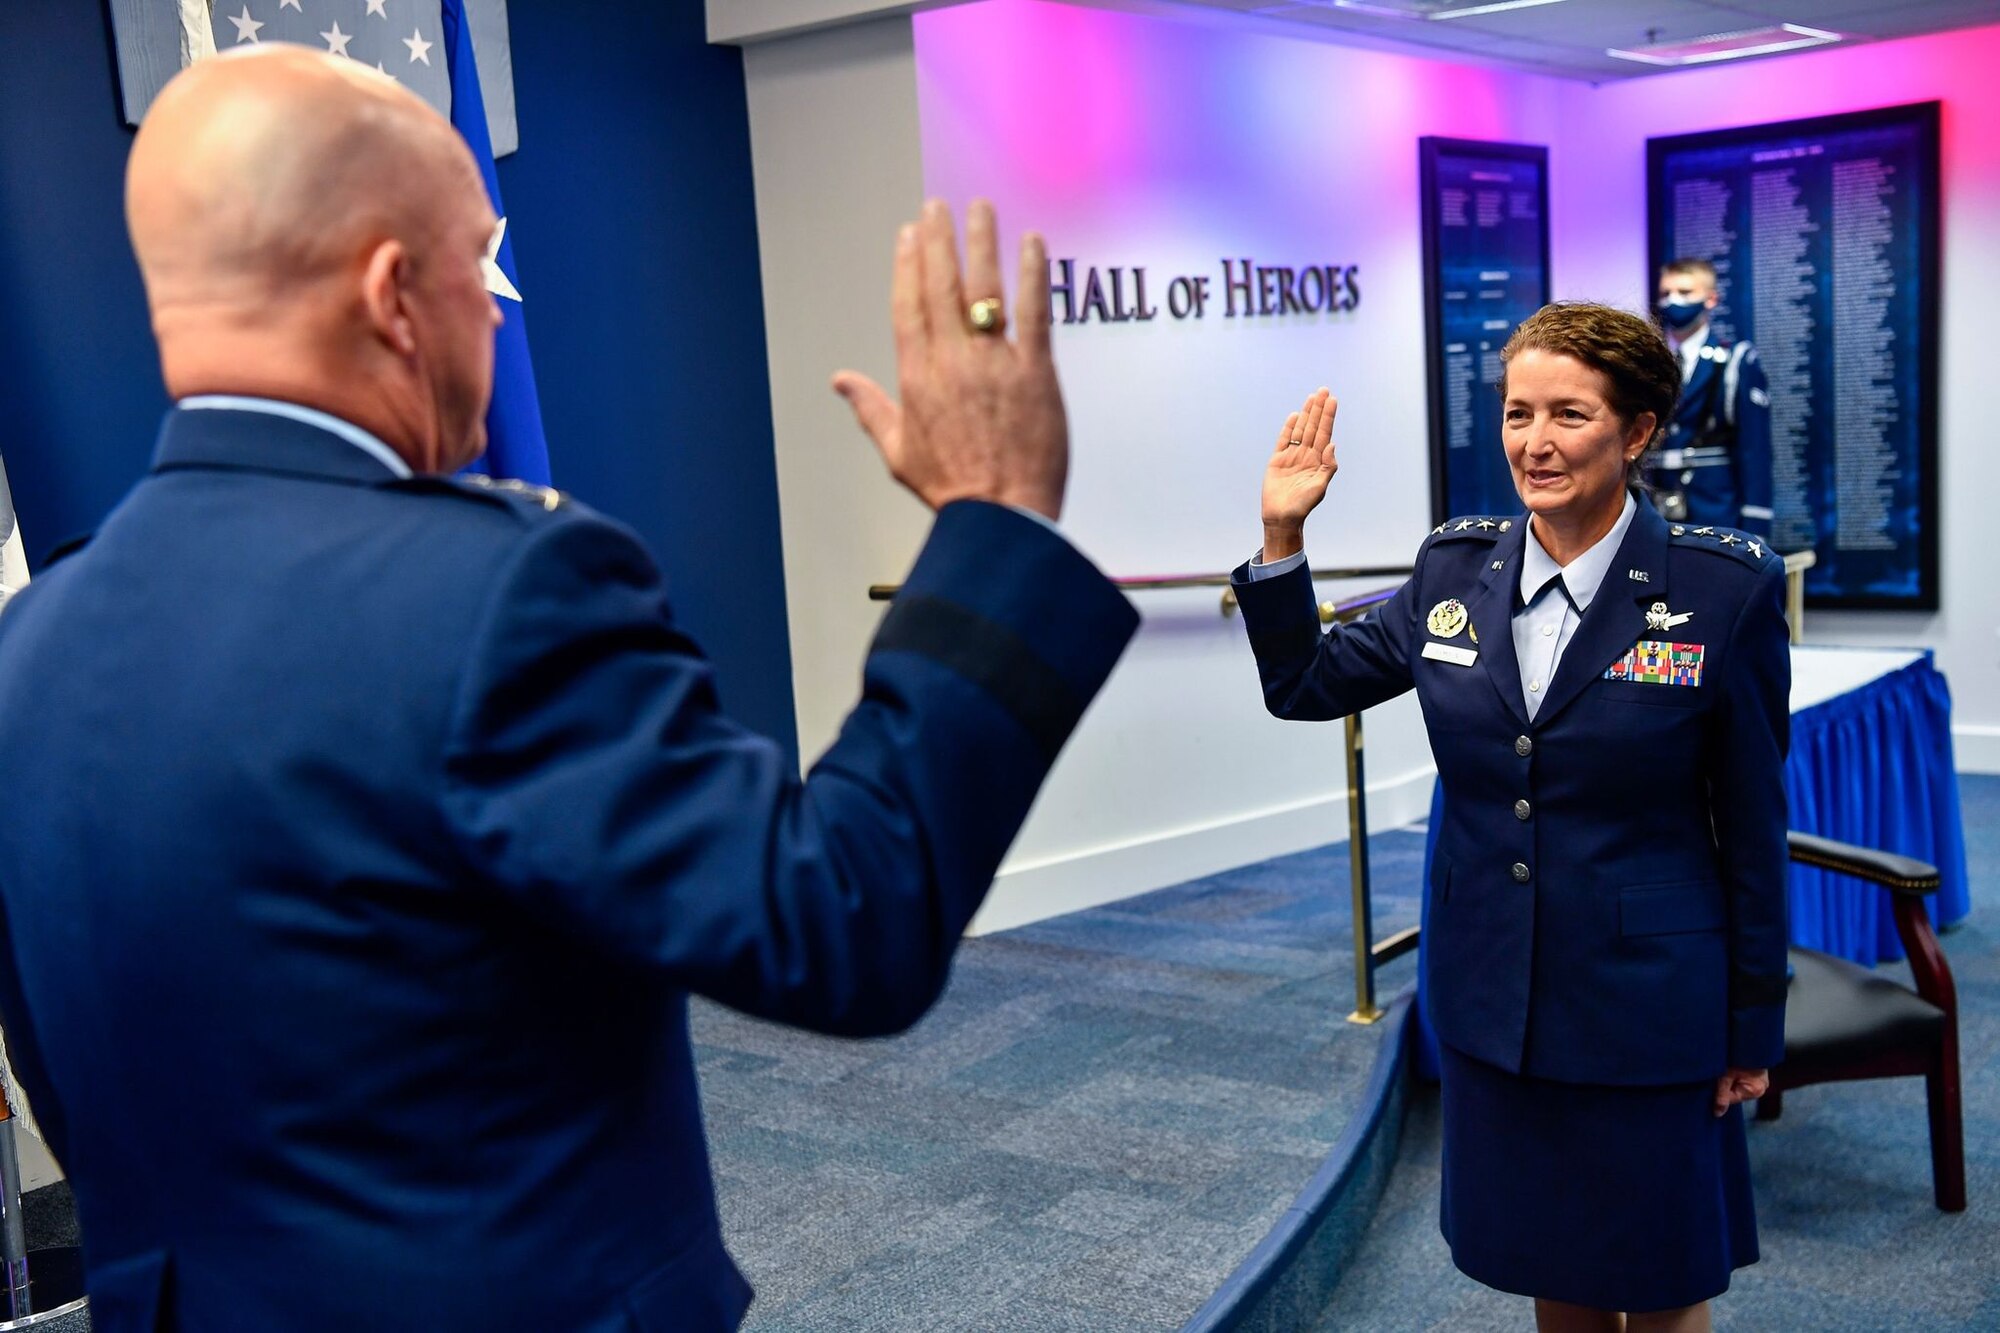 Lt. Gen. Nina M. Armagno recites the oath of office with Chief of Space Operations Gen. John W. Raymond during her promotion ceremony at the Pentagon, Arlington, Va., Aug. 17, 2020. Armagno transferred from the Air Force to Space Force during the ceremony. (U.S Air Force photo by Eric Dietrich)